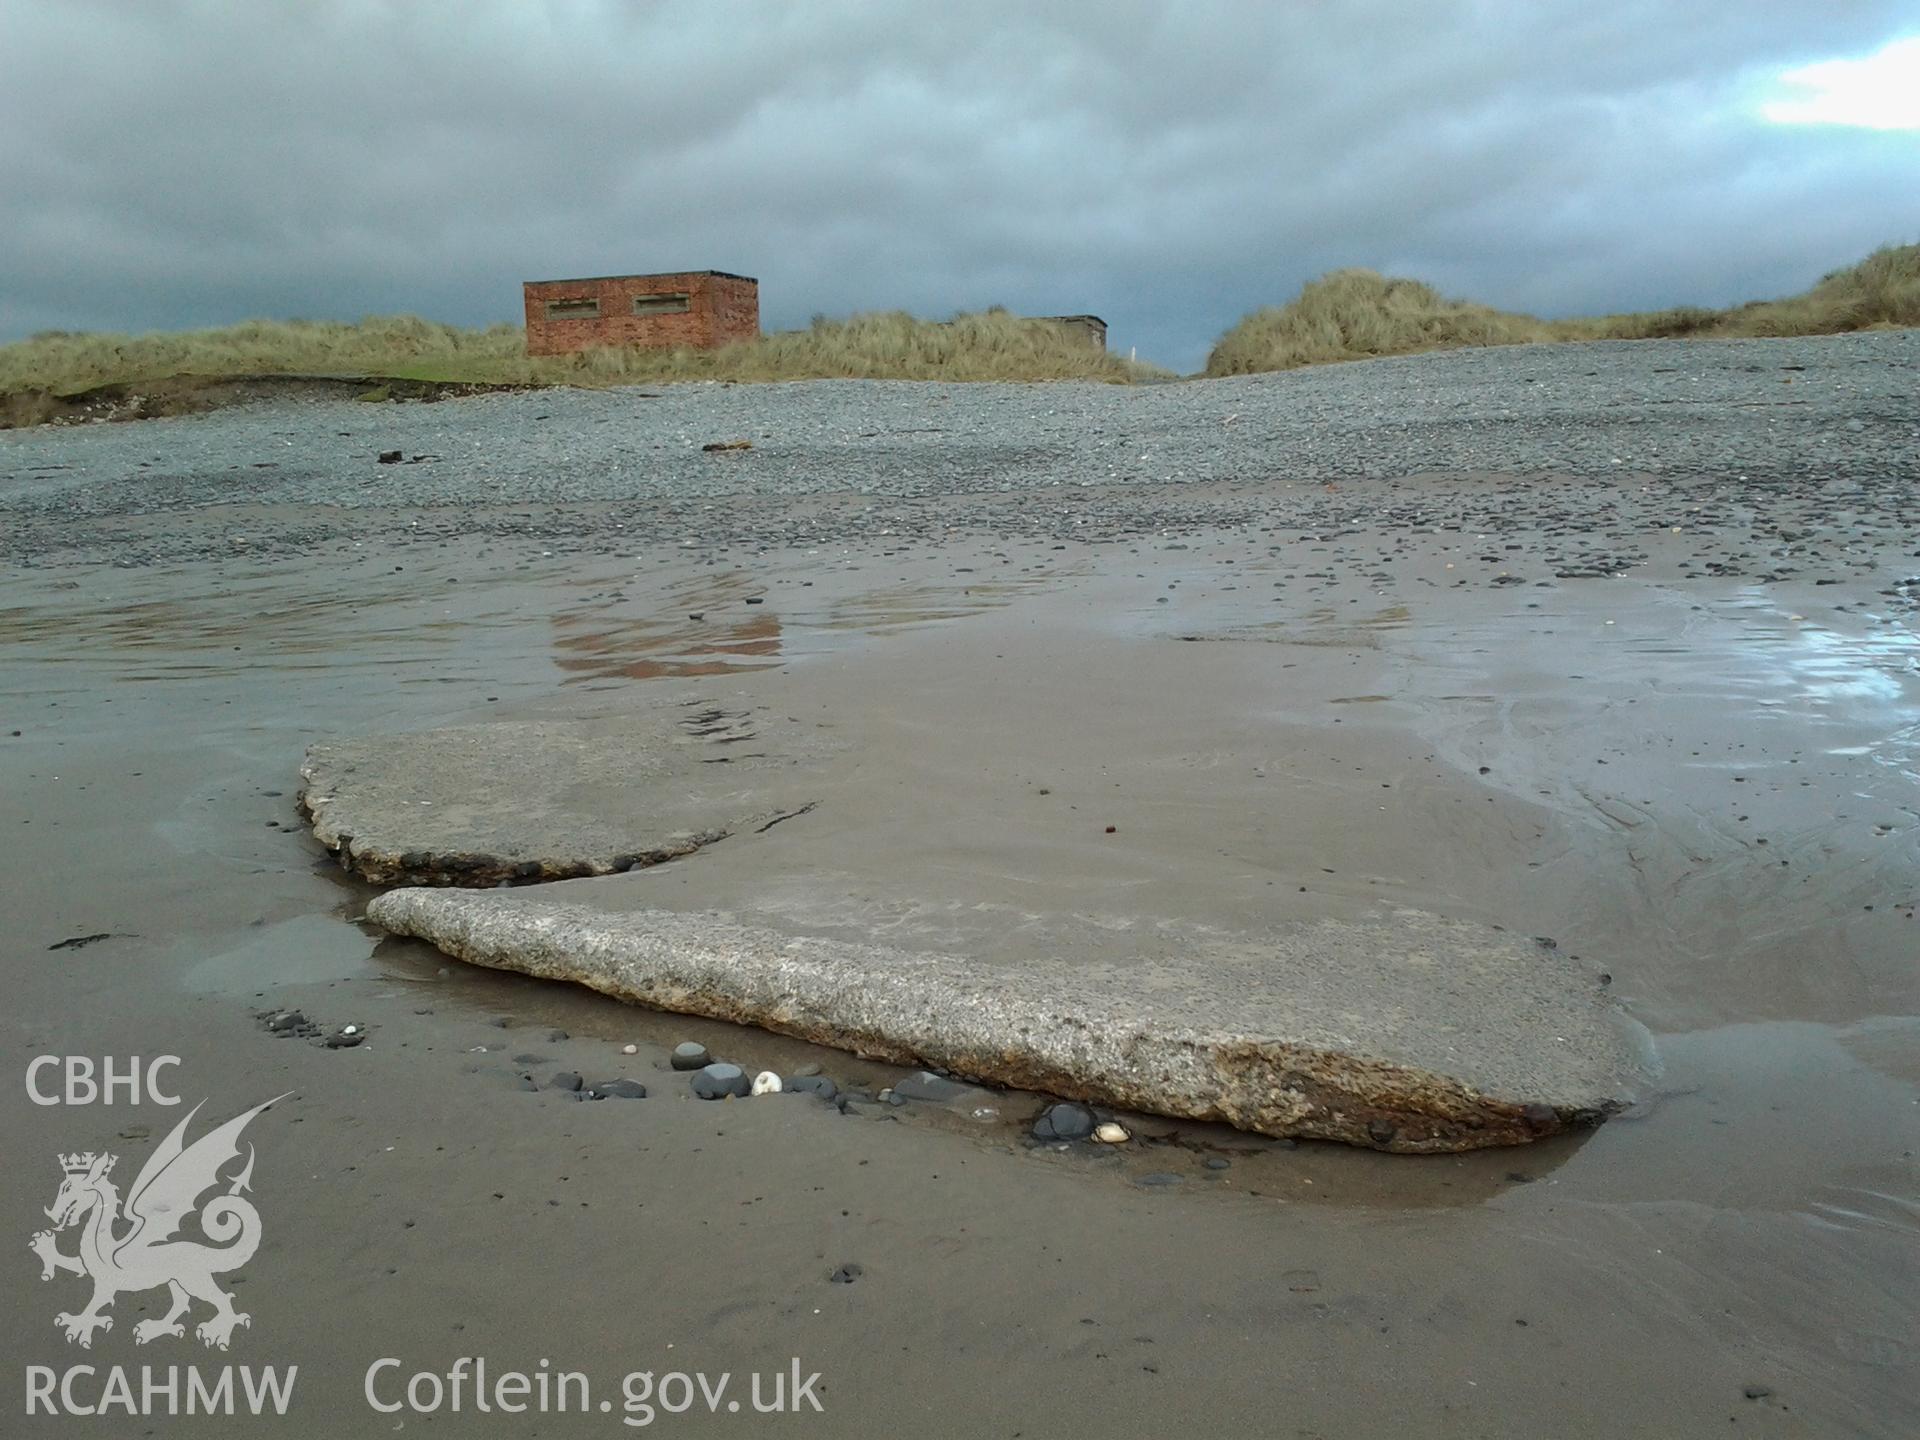 Slipway with Observation Post (NPRN 408402) in background